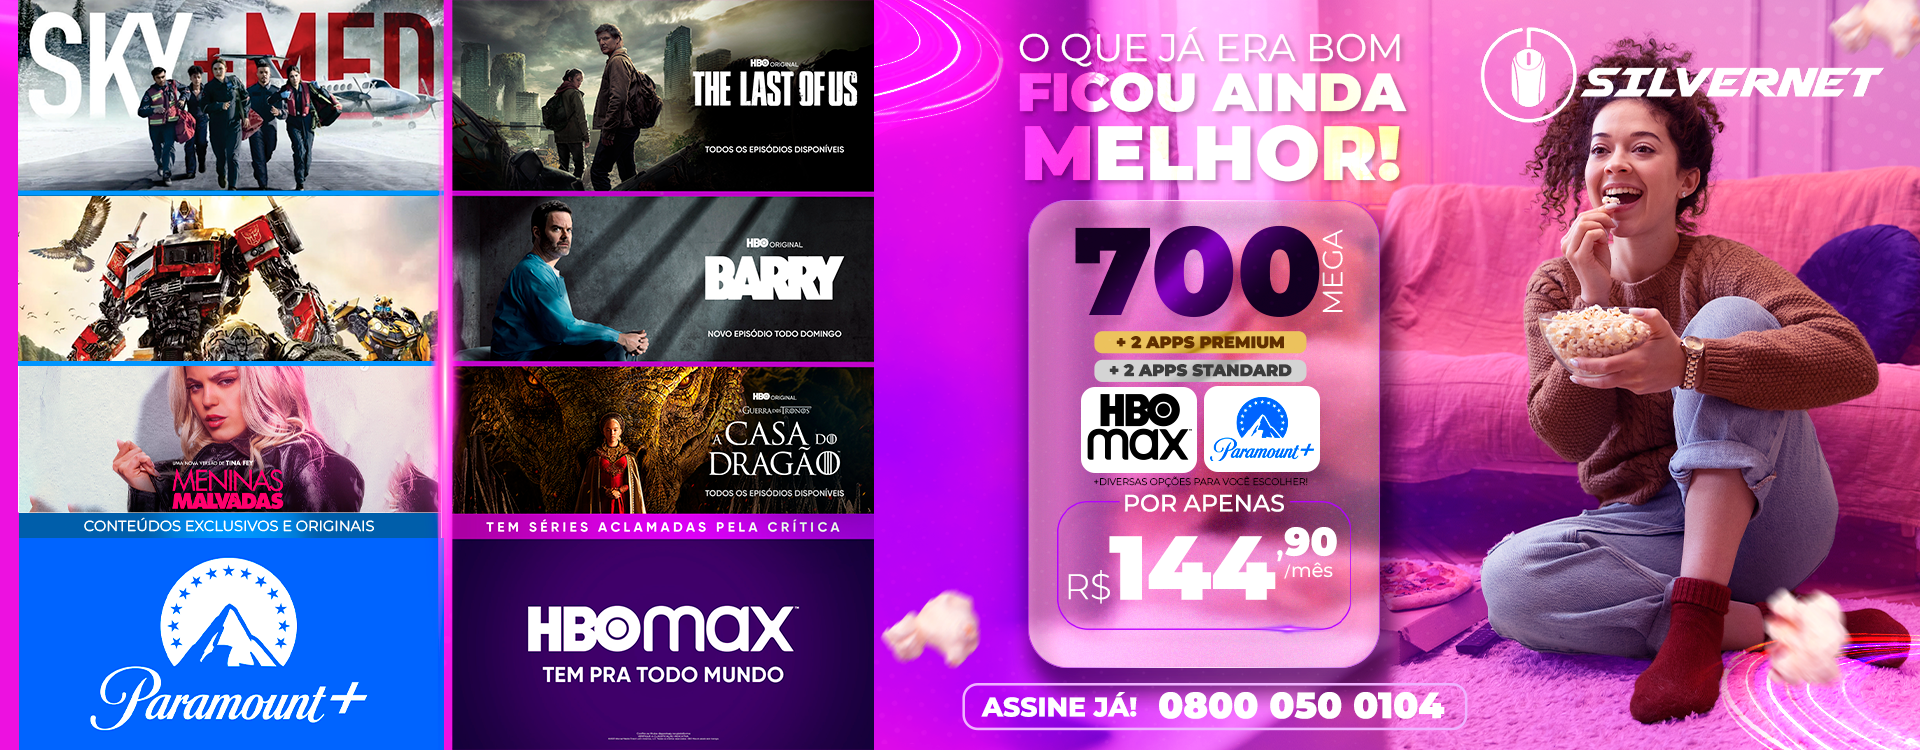 SILVERNET BANNER HBO PARAMOUNT